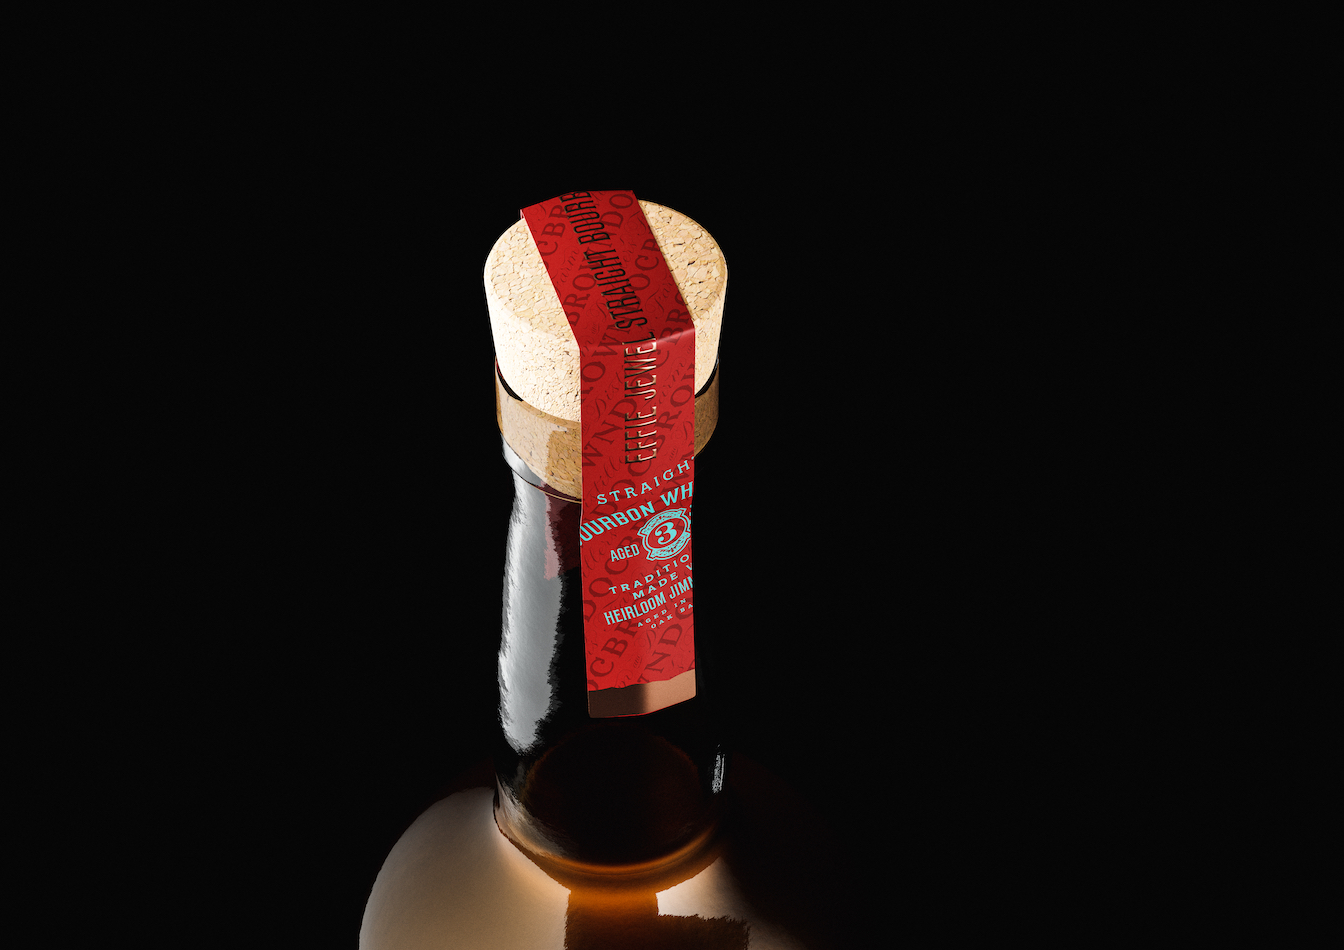 Effie Jewel Straight Bourbon Whiskey from Doc Brown Farm and distillers, cork stopper and seal image